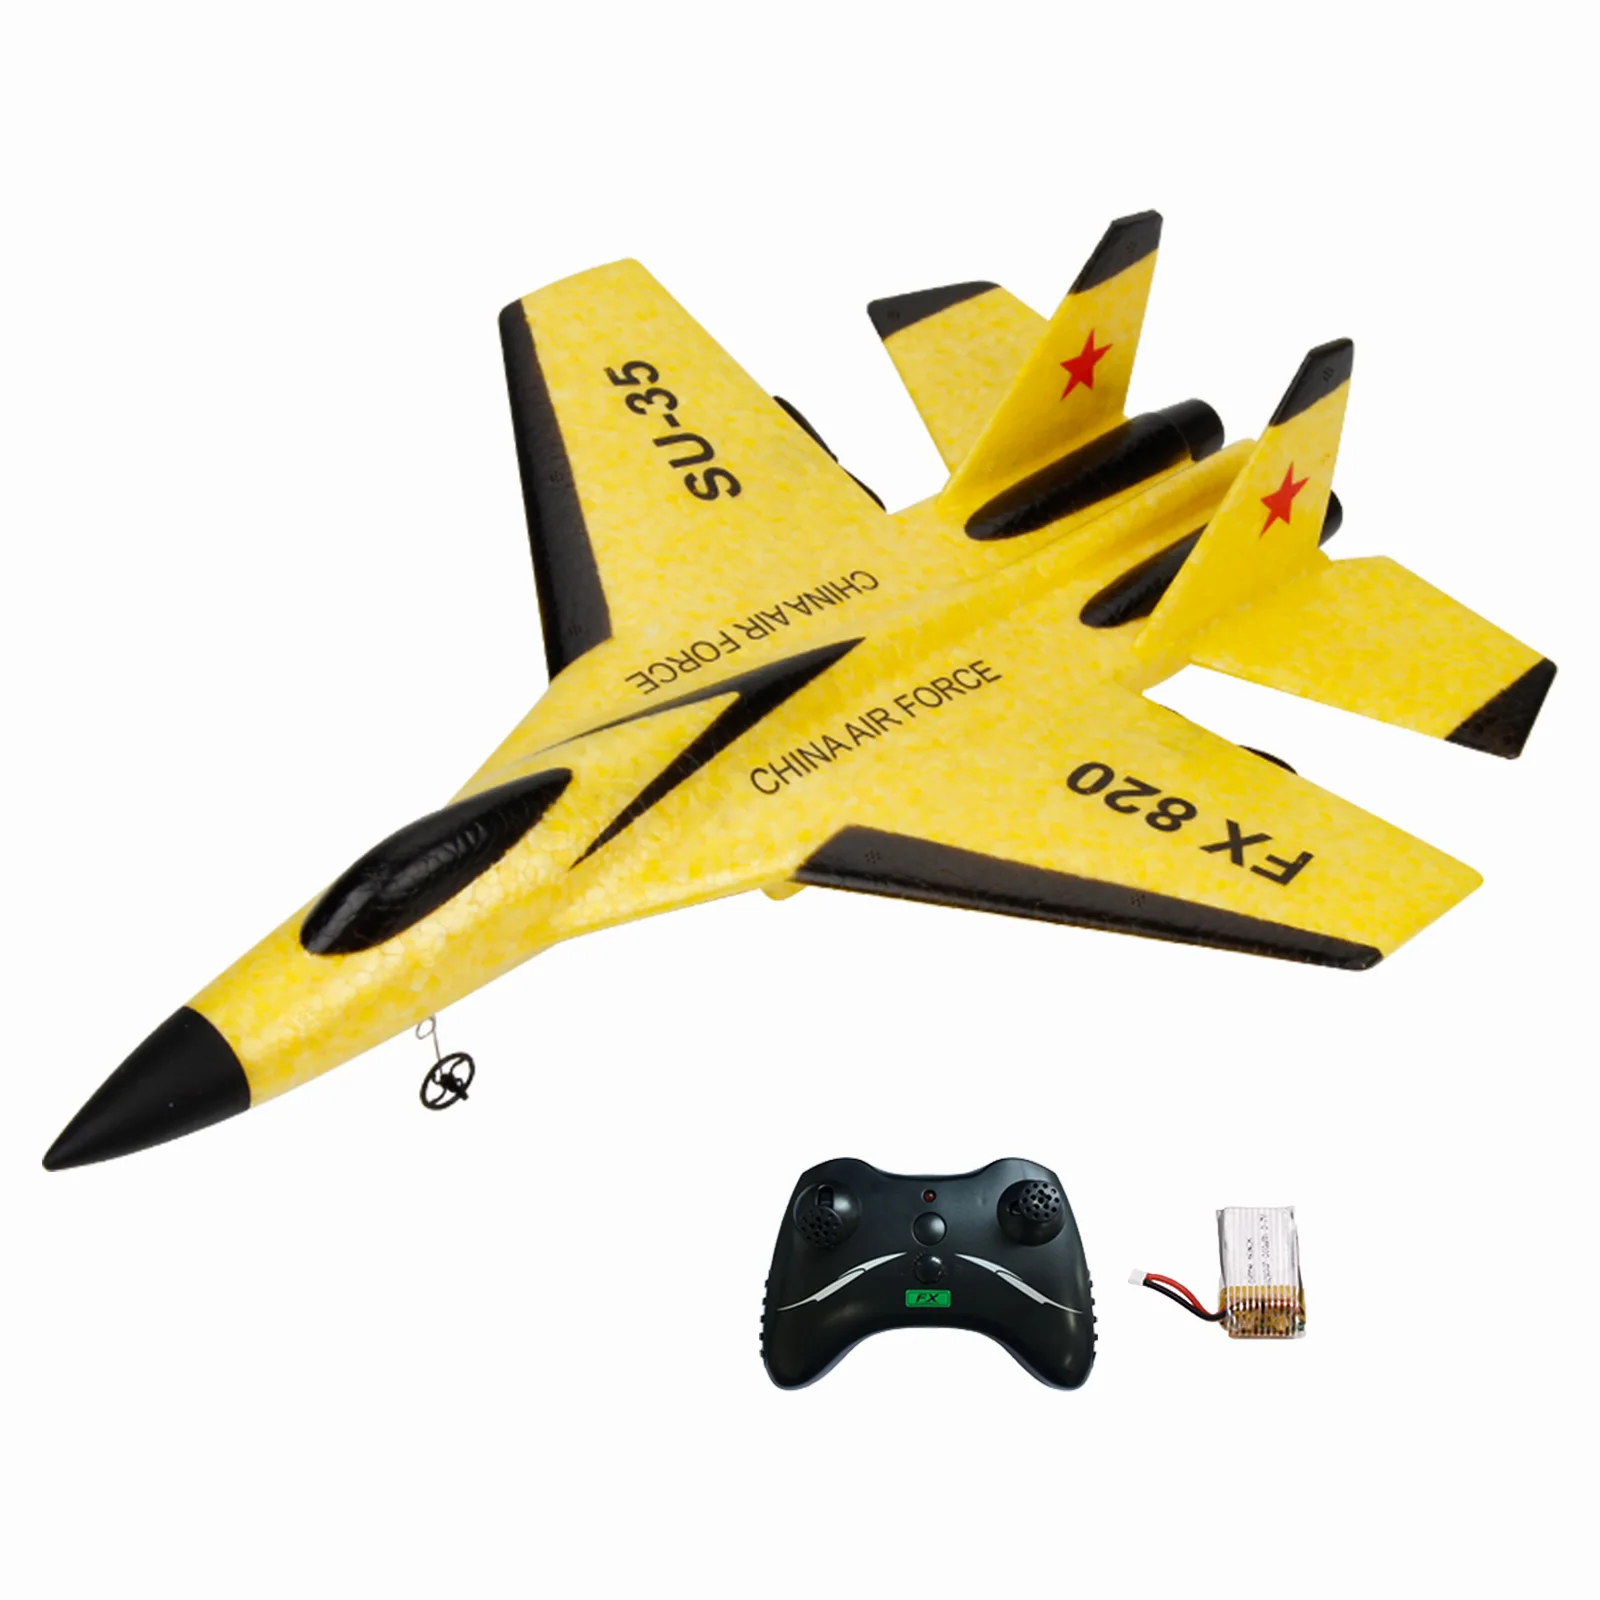 

FX-820 2.4GHz 4 Channels Toys Gifts for Friends Remote Control Airplanes Toys for Children Holiday Party Gifts